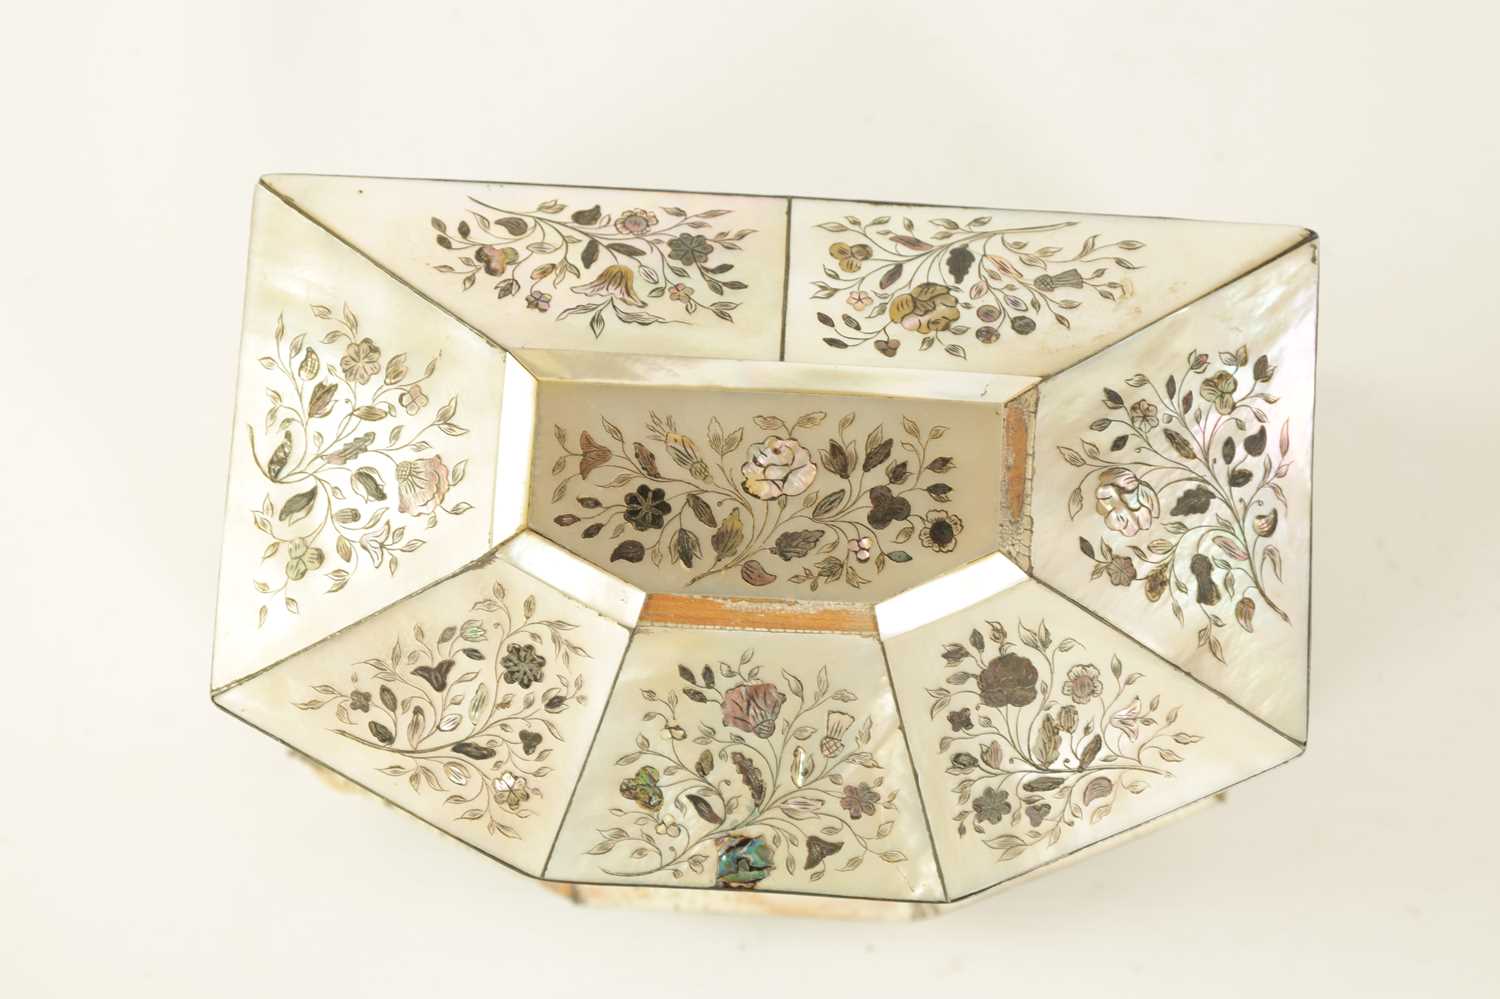 A 19TH CENTURY INLAID MOTHER OF PEARL TEA CADDY WITH CANTED ANGLED FRONT - Image 4 of 10